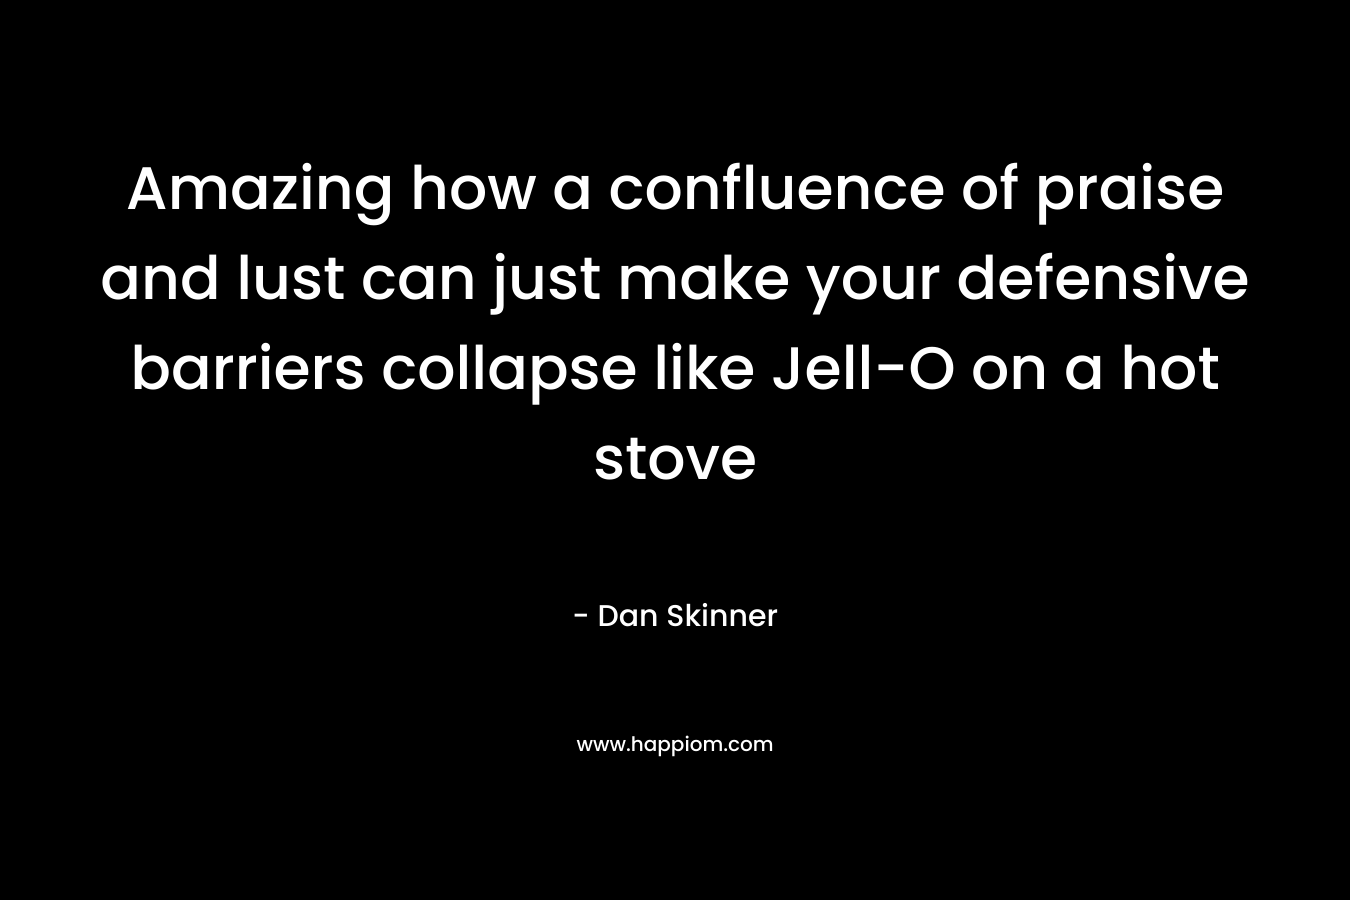 Amazing how a confluence of praise and lust can just make your defensive barriers collapse like Jell-O on a hot stove – Dan Skinner